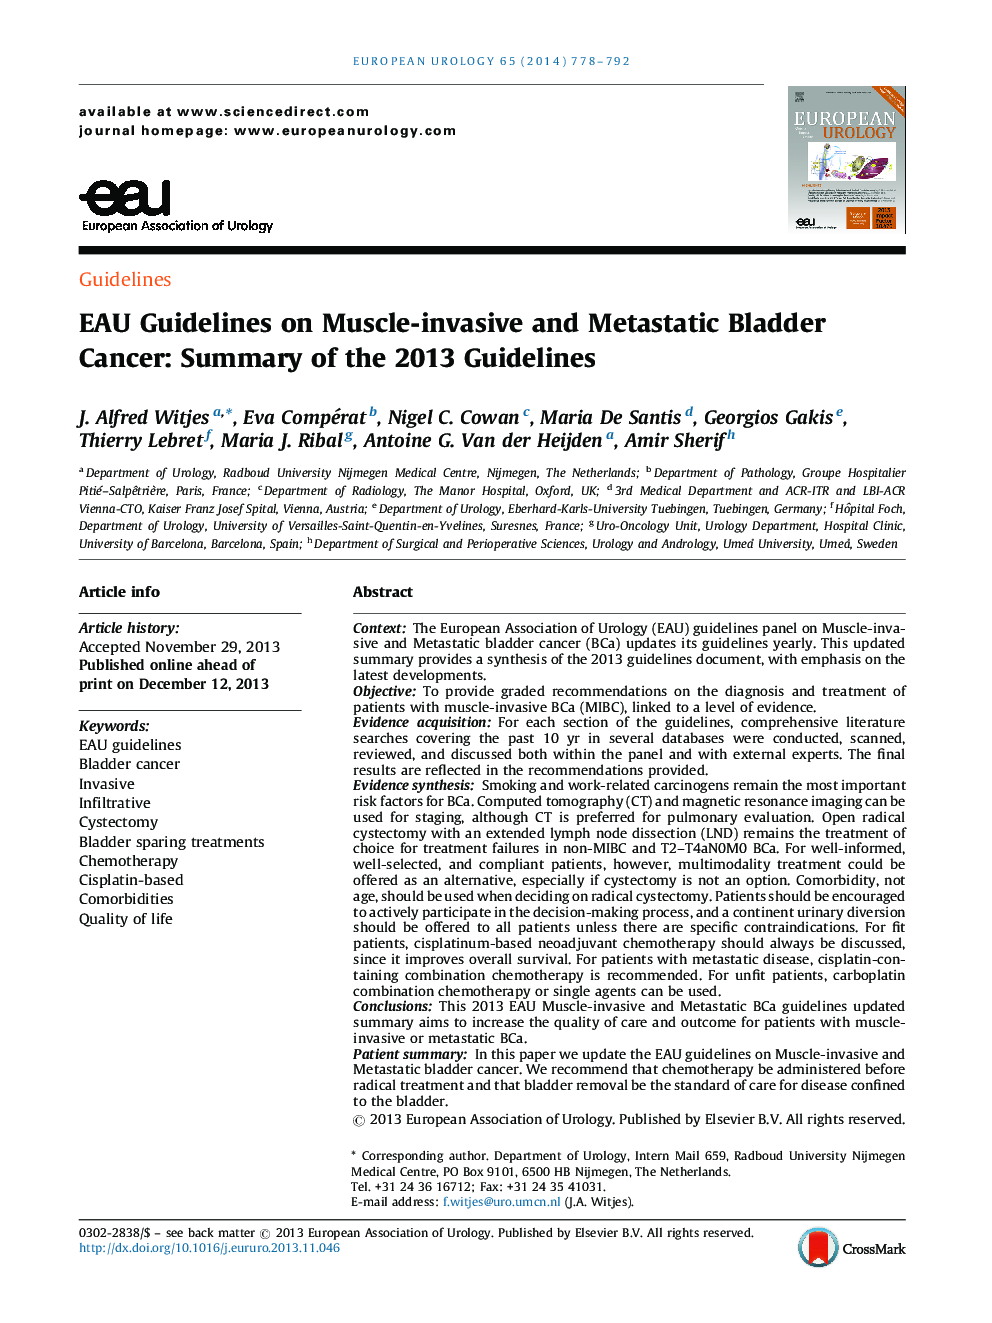 EAU Guidelines on Muscle-invasive and Metastatic Bladder Cancer: Summary of the 2013 Guidelines